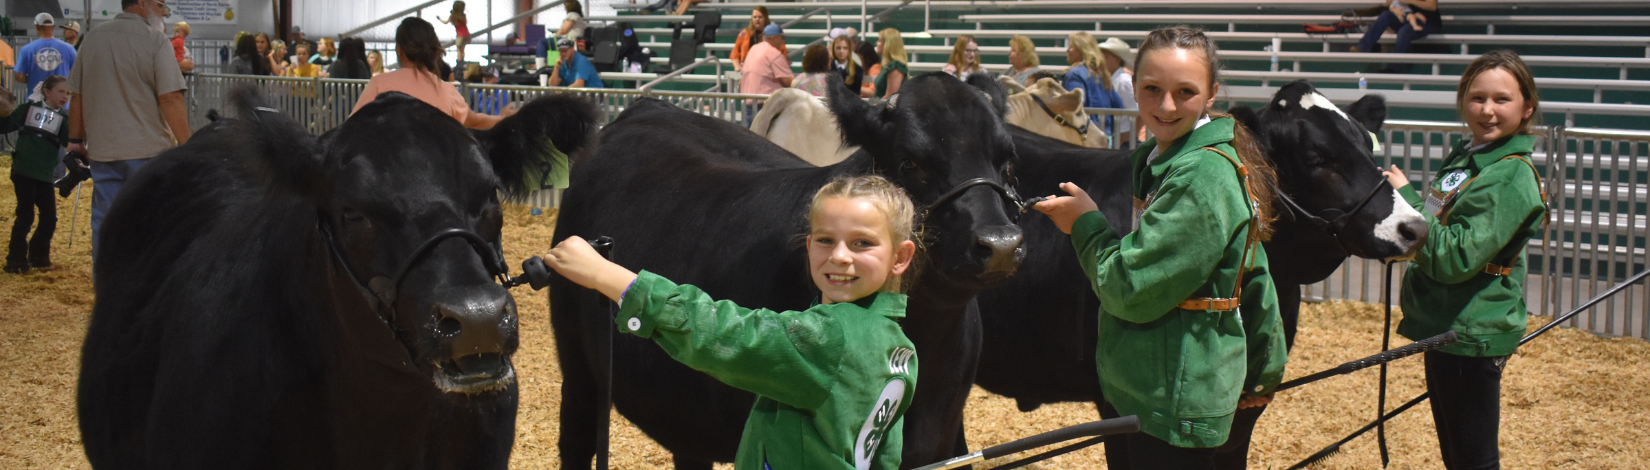 4-H Members with their fat steers at the Suwannee River Fair